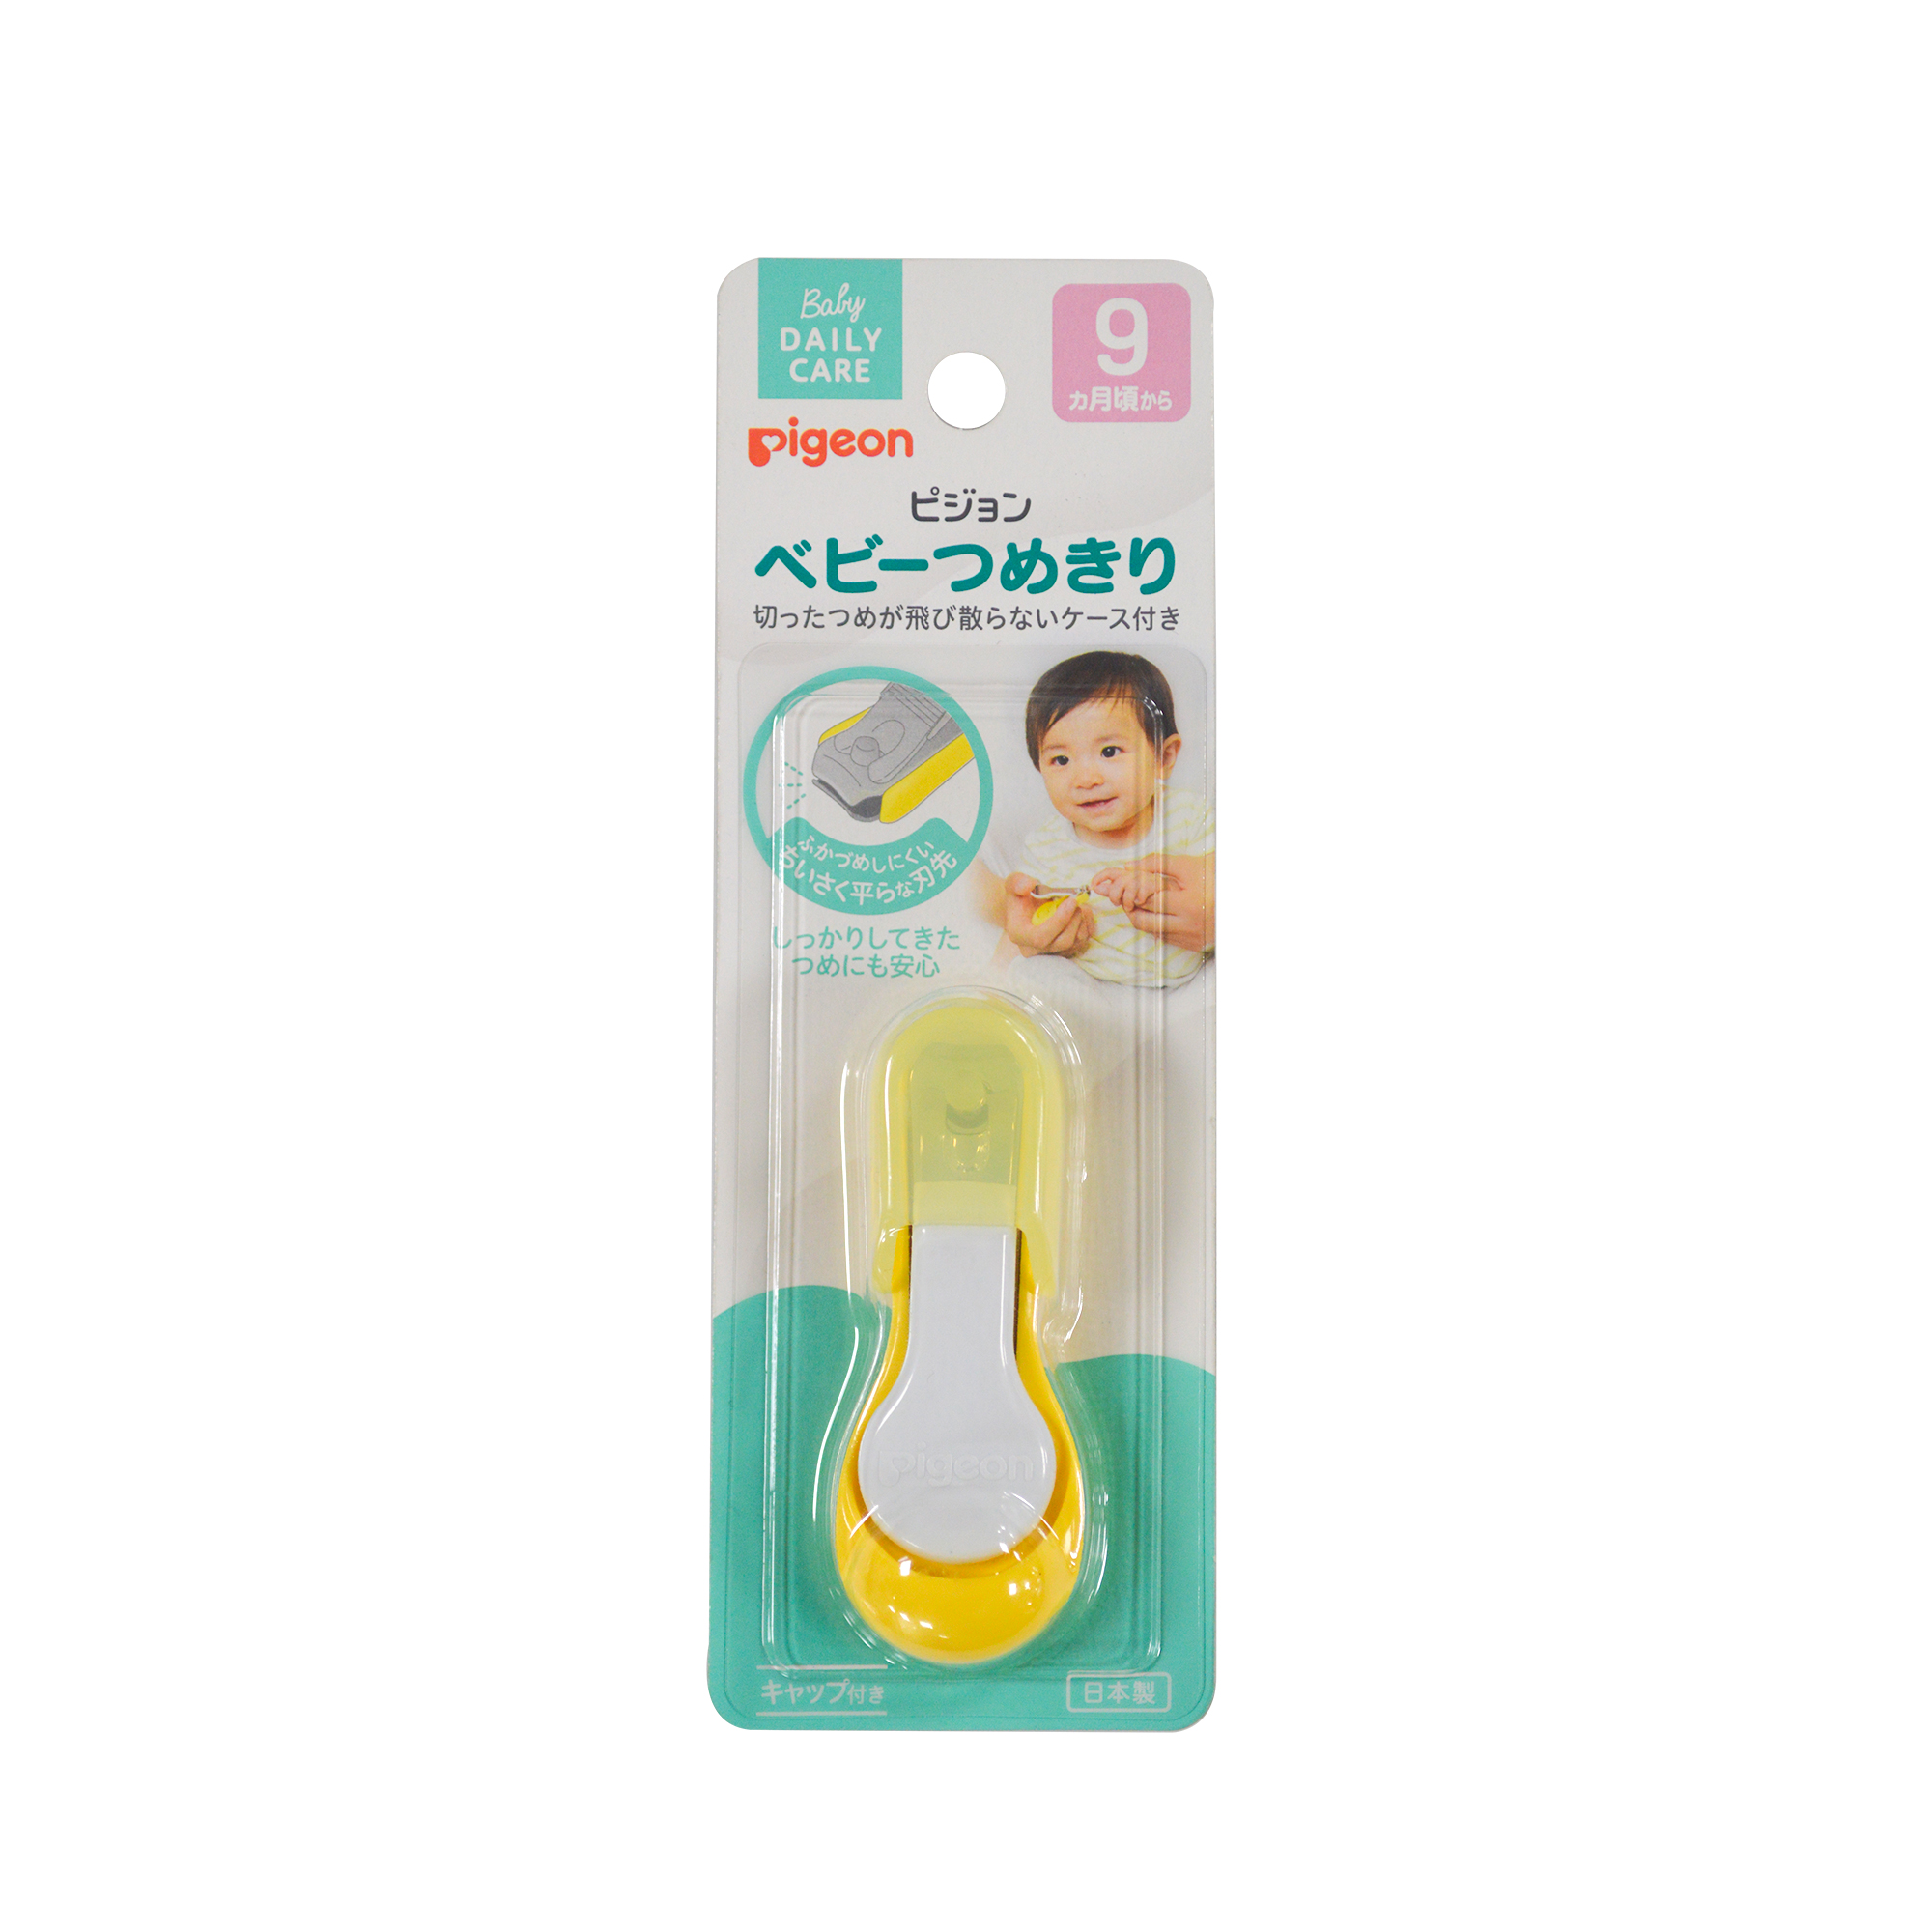 MOMNIKIDS Pack of 1 Newborn Baby Safety Nail Clippers Scissors Cutter -  Price in India, Buy MOMNIKIDS Pack of 1 Newborn Baby Safety Nail Clippers  Scissors Cutter Online In India, Reviews, Ratings